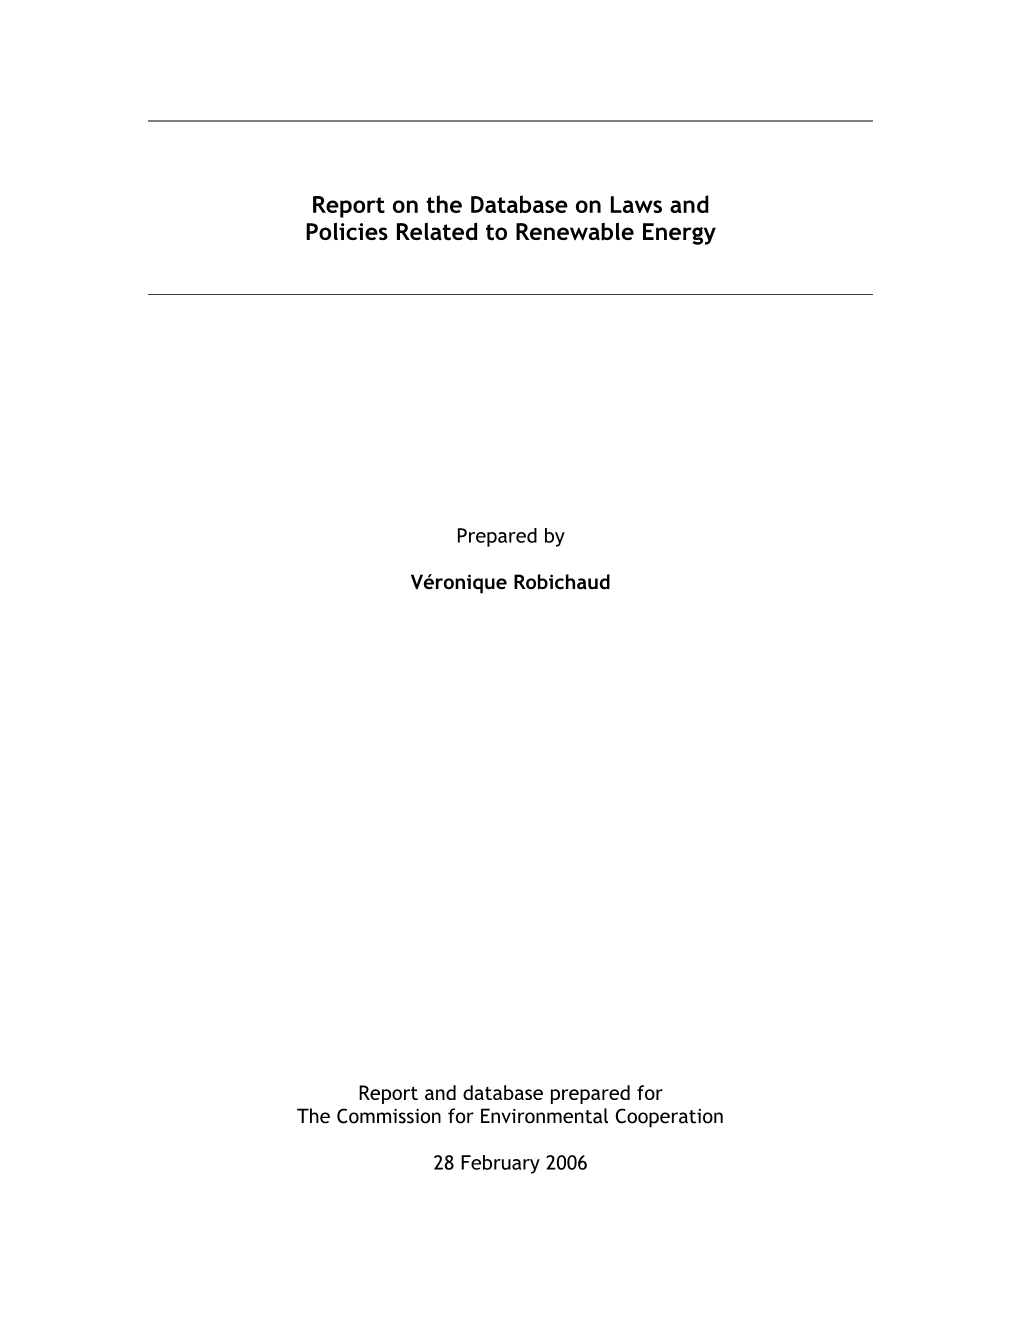 Report on the Database on Laws and Policies Related to Renewable Energy